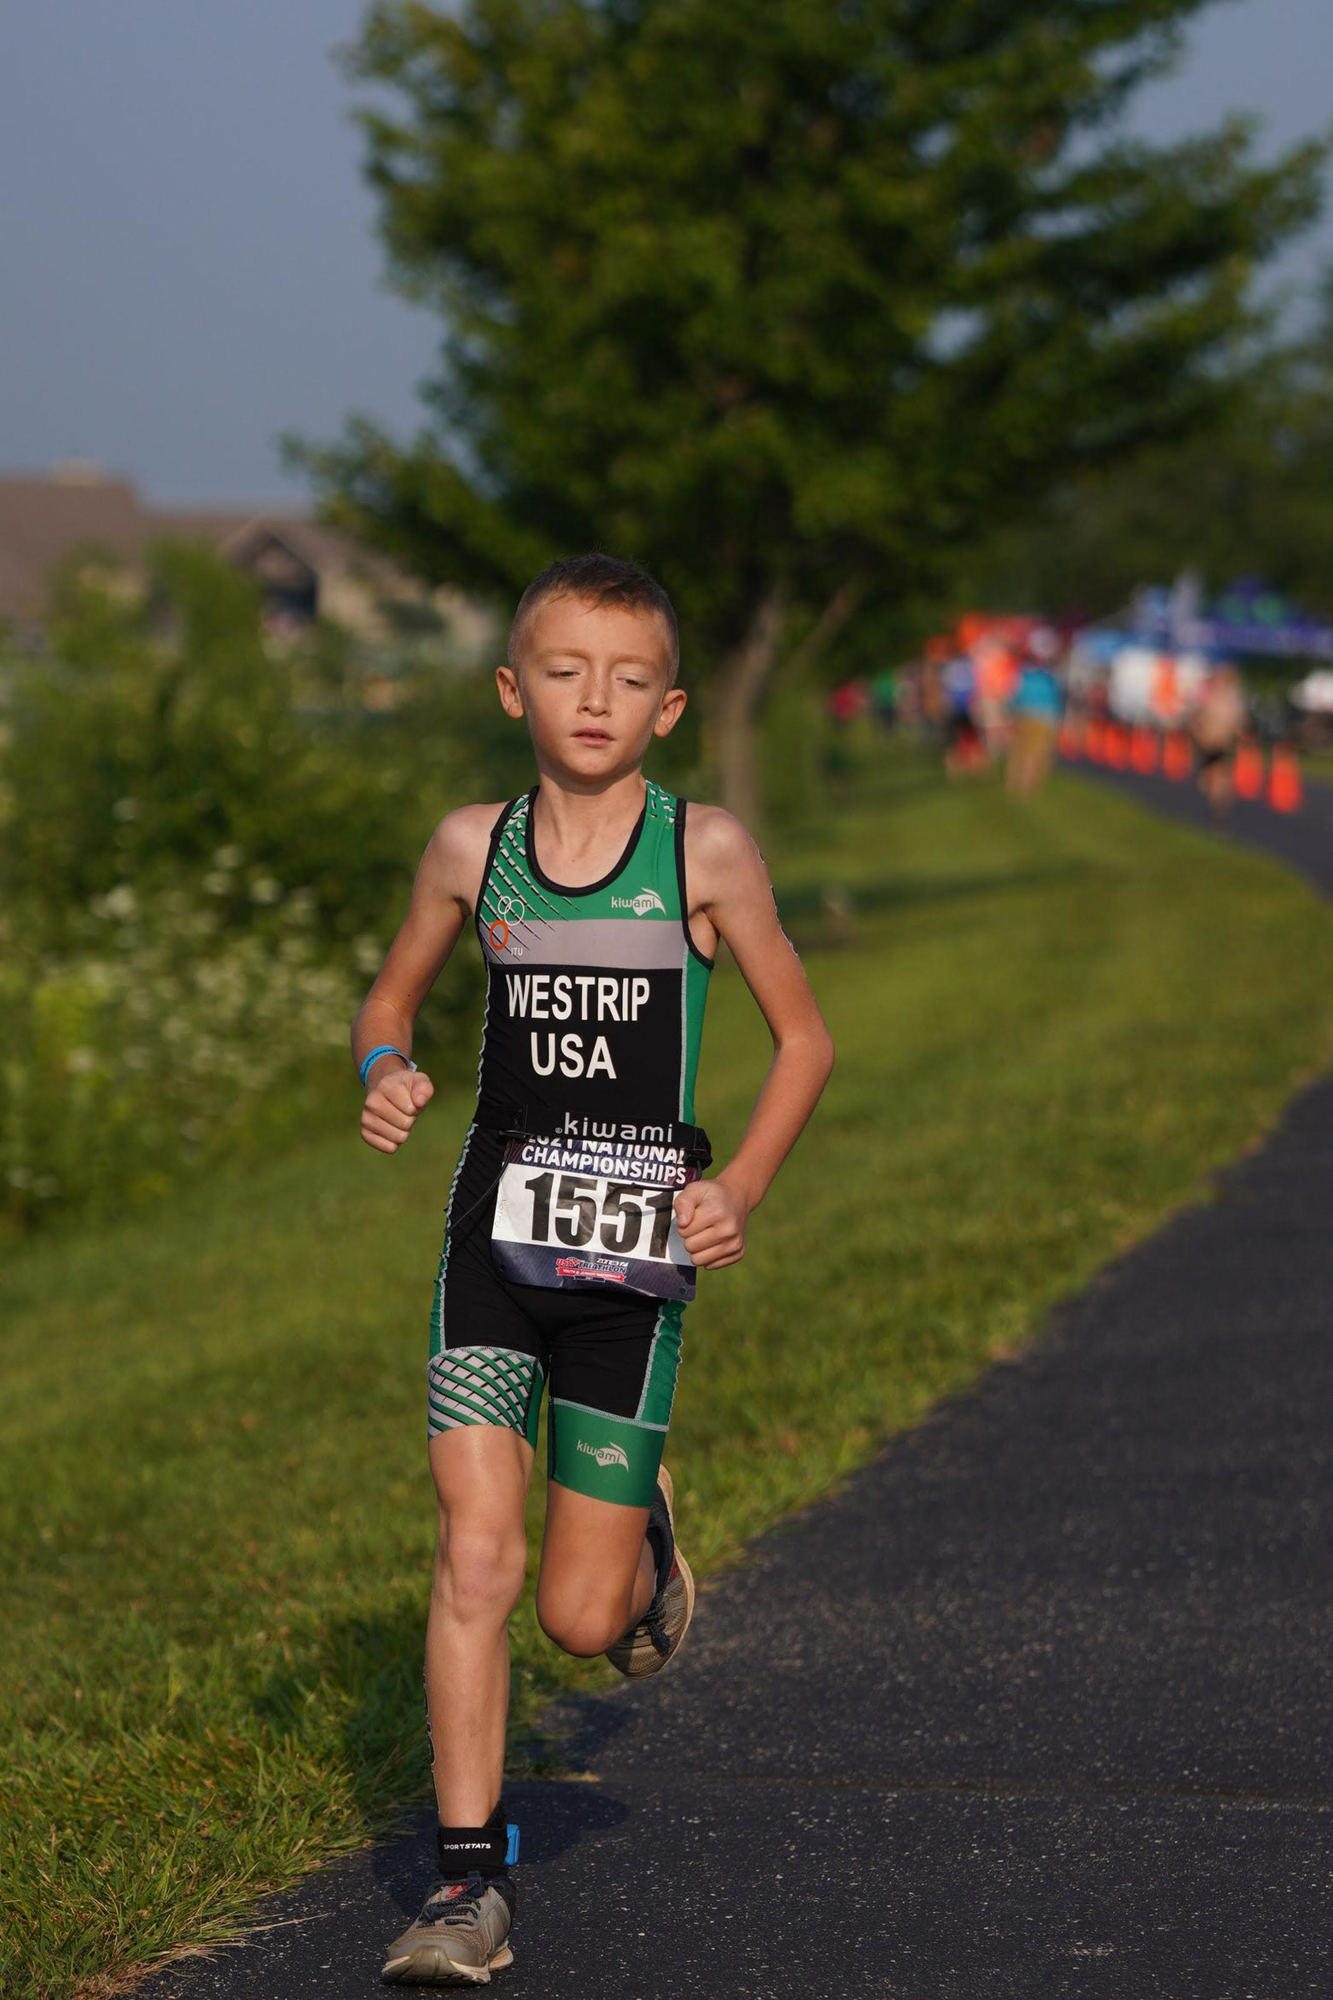 Aaron Westrip won the Youth and Junior National Championship in triathlon at Voice of America MetroPark in the West Chester Township of Ohio.    Courtesy photo